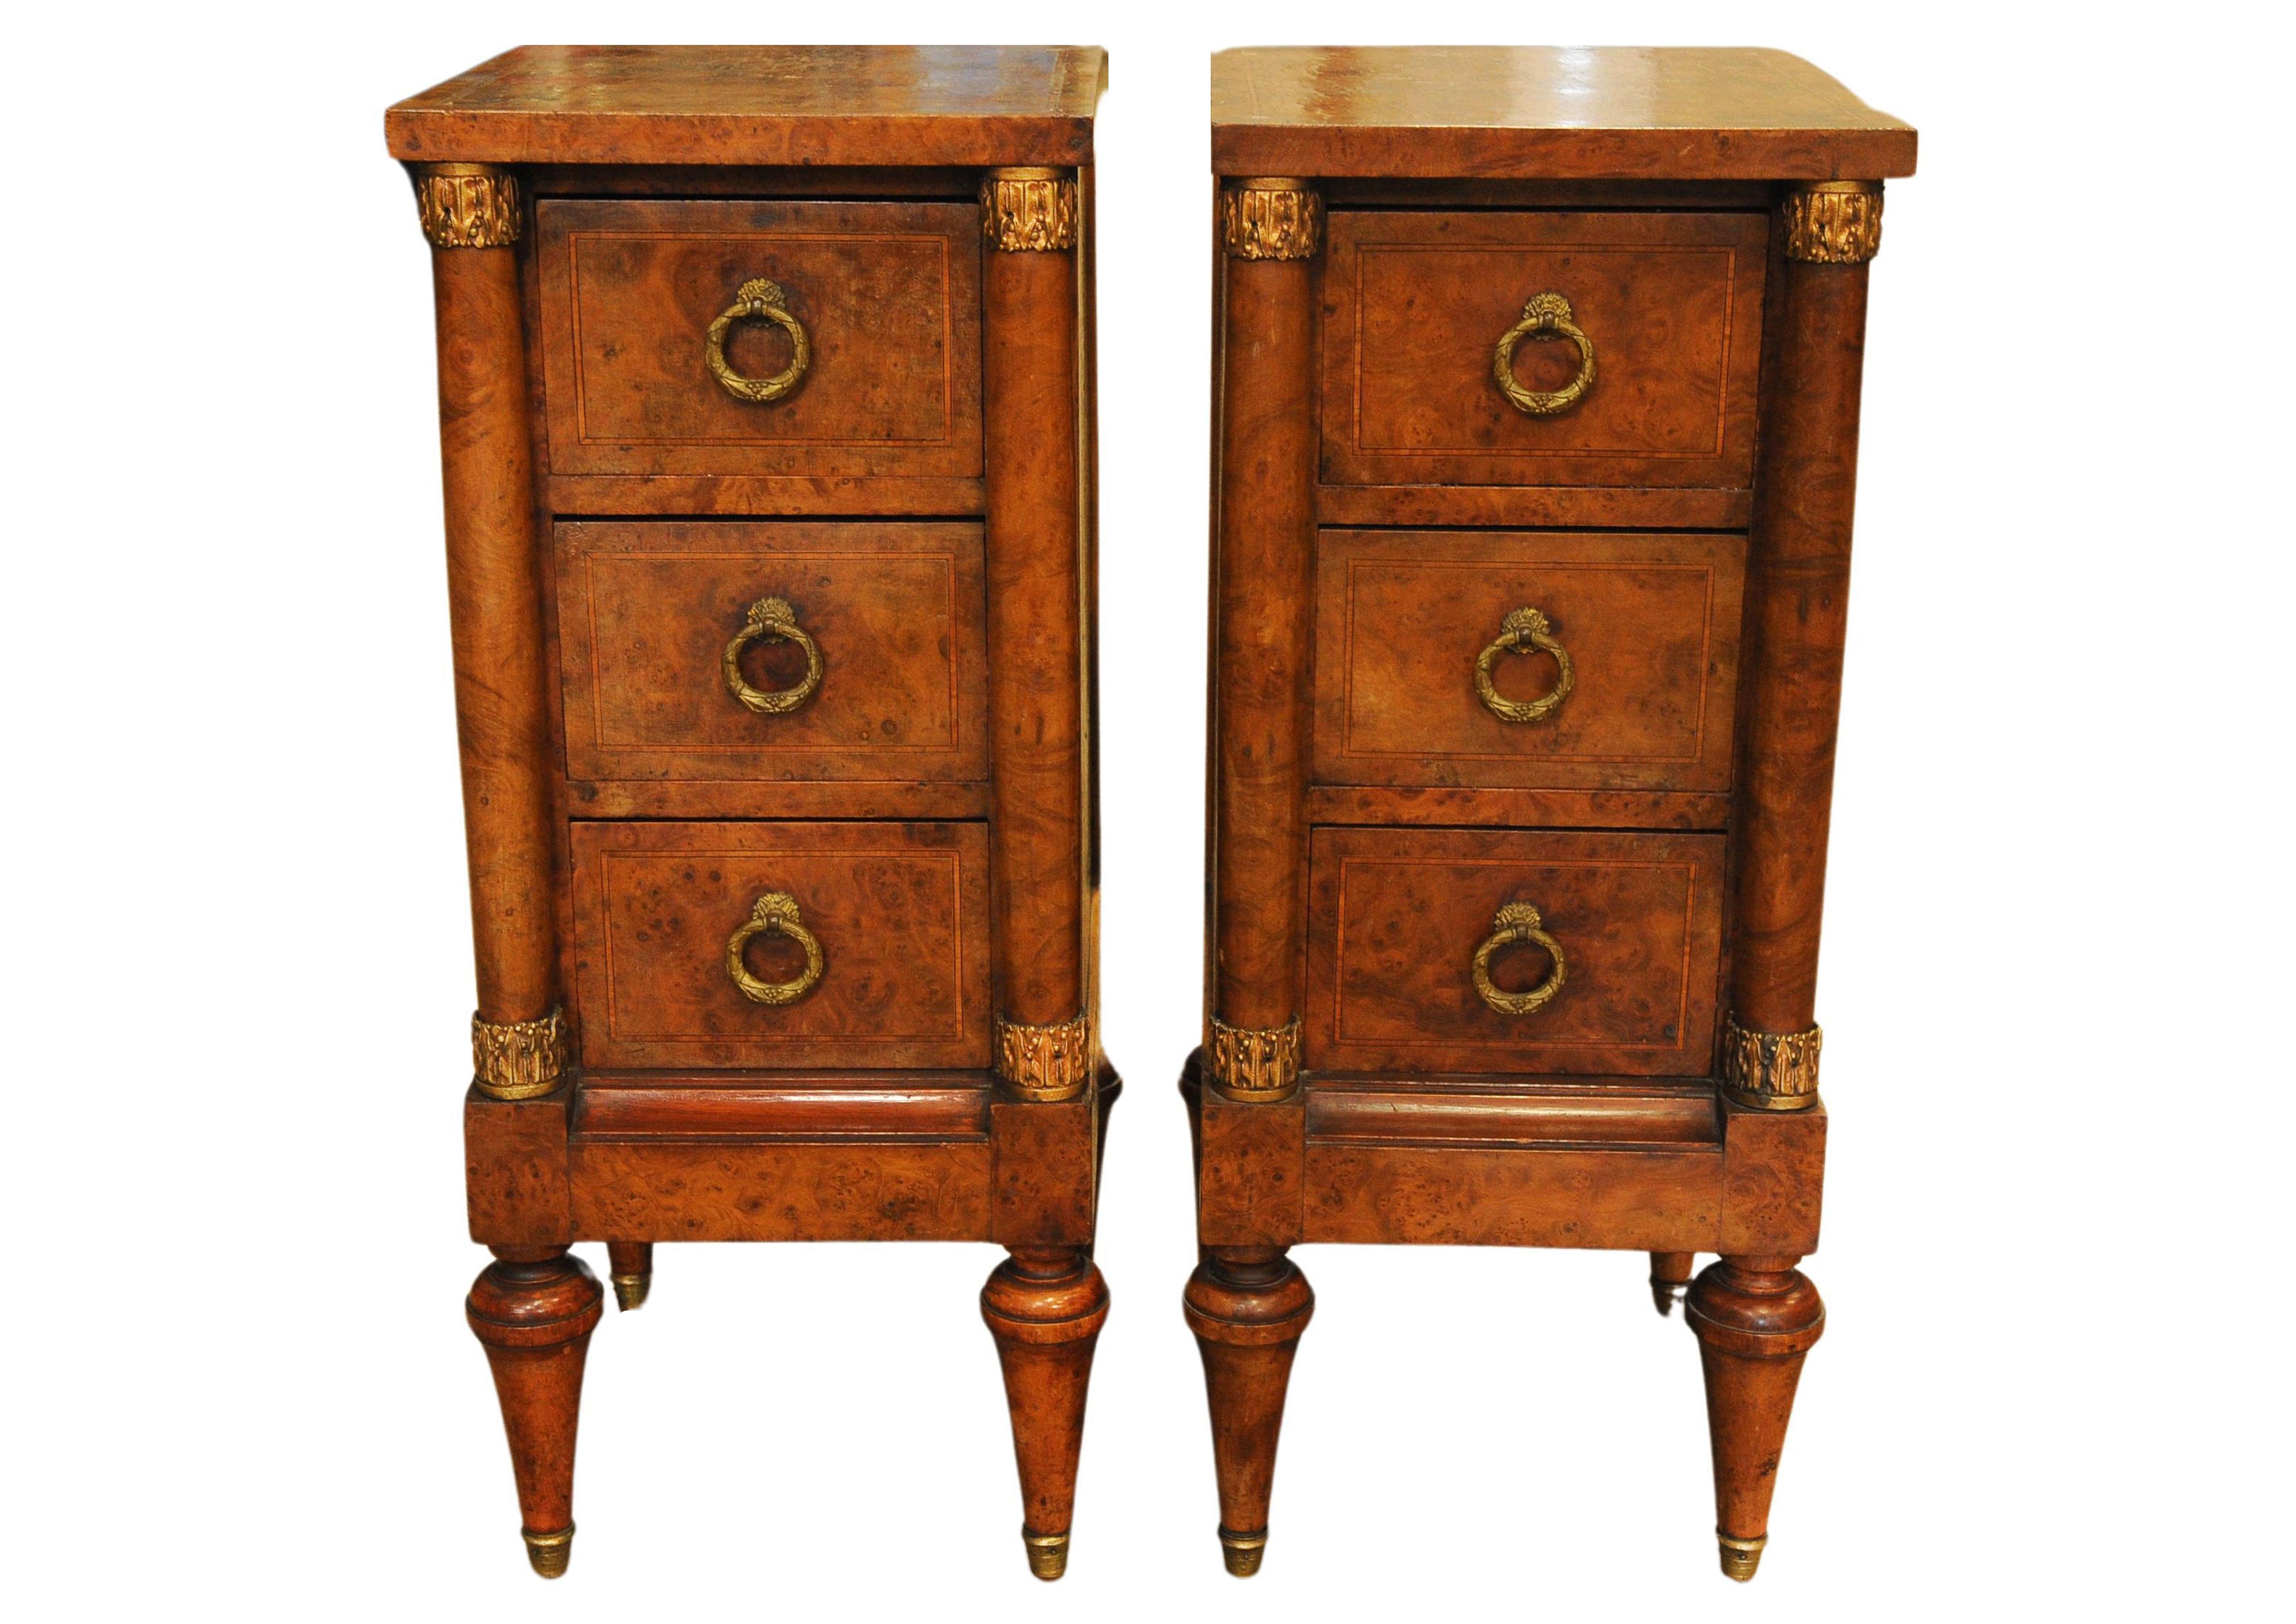 Inlay Exquisite Pair of French Empire Design Figured Walnut Three Drawer Nightstands For Sale